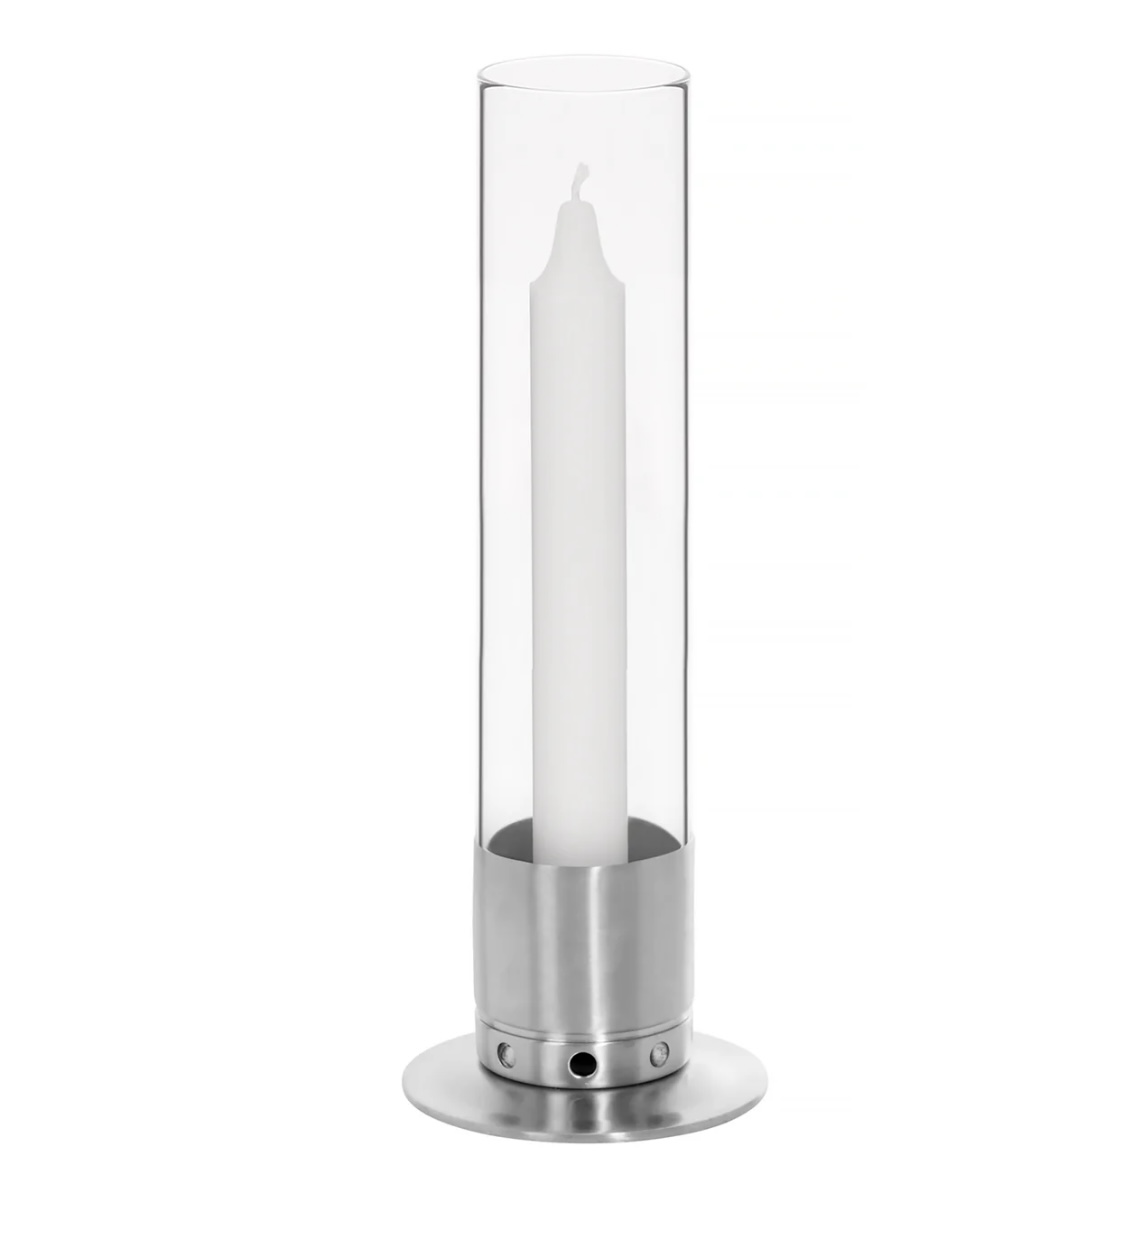 Candleholder brushed stainless steel small